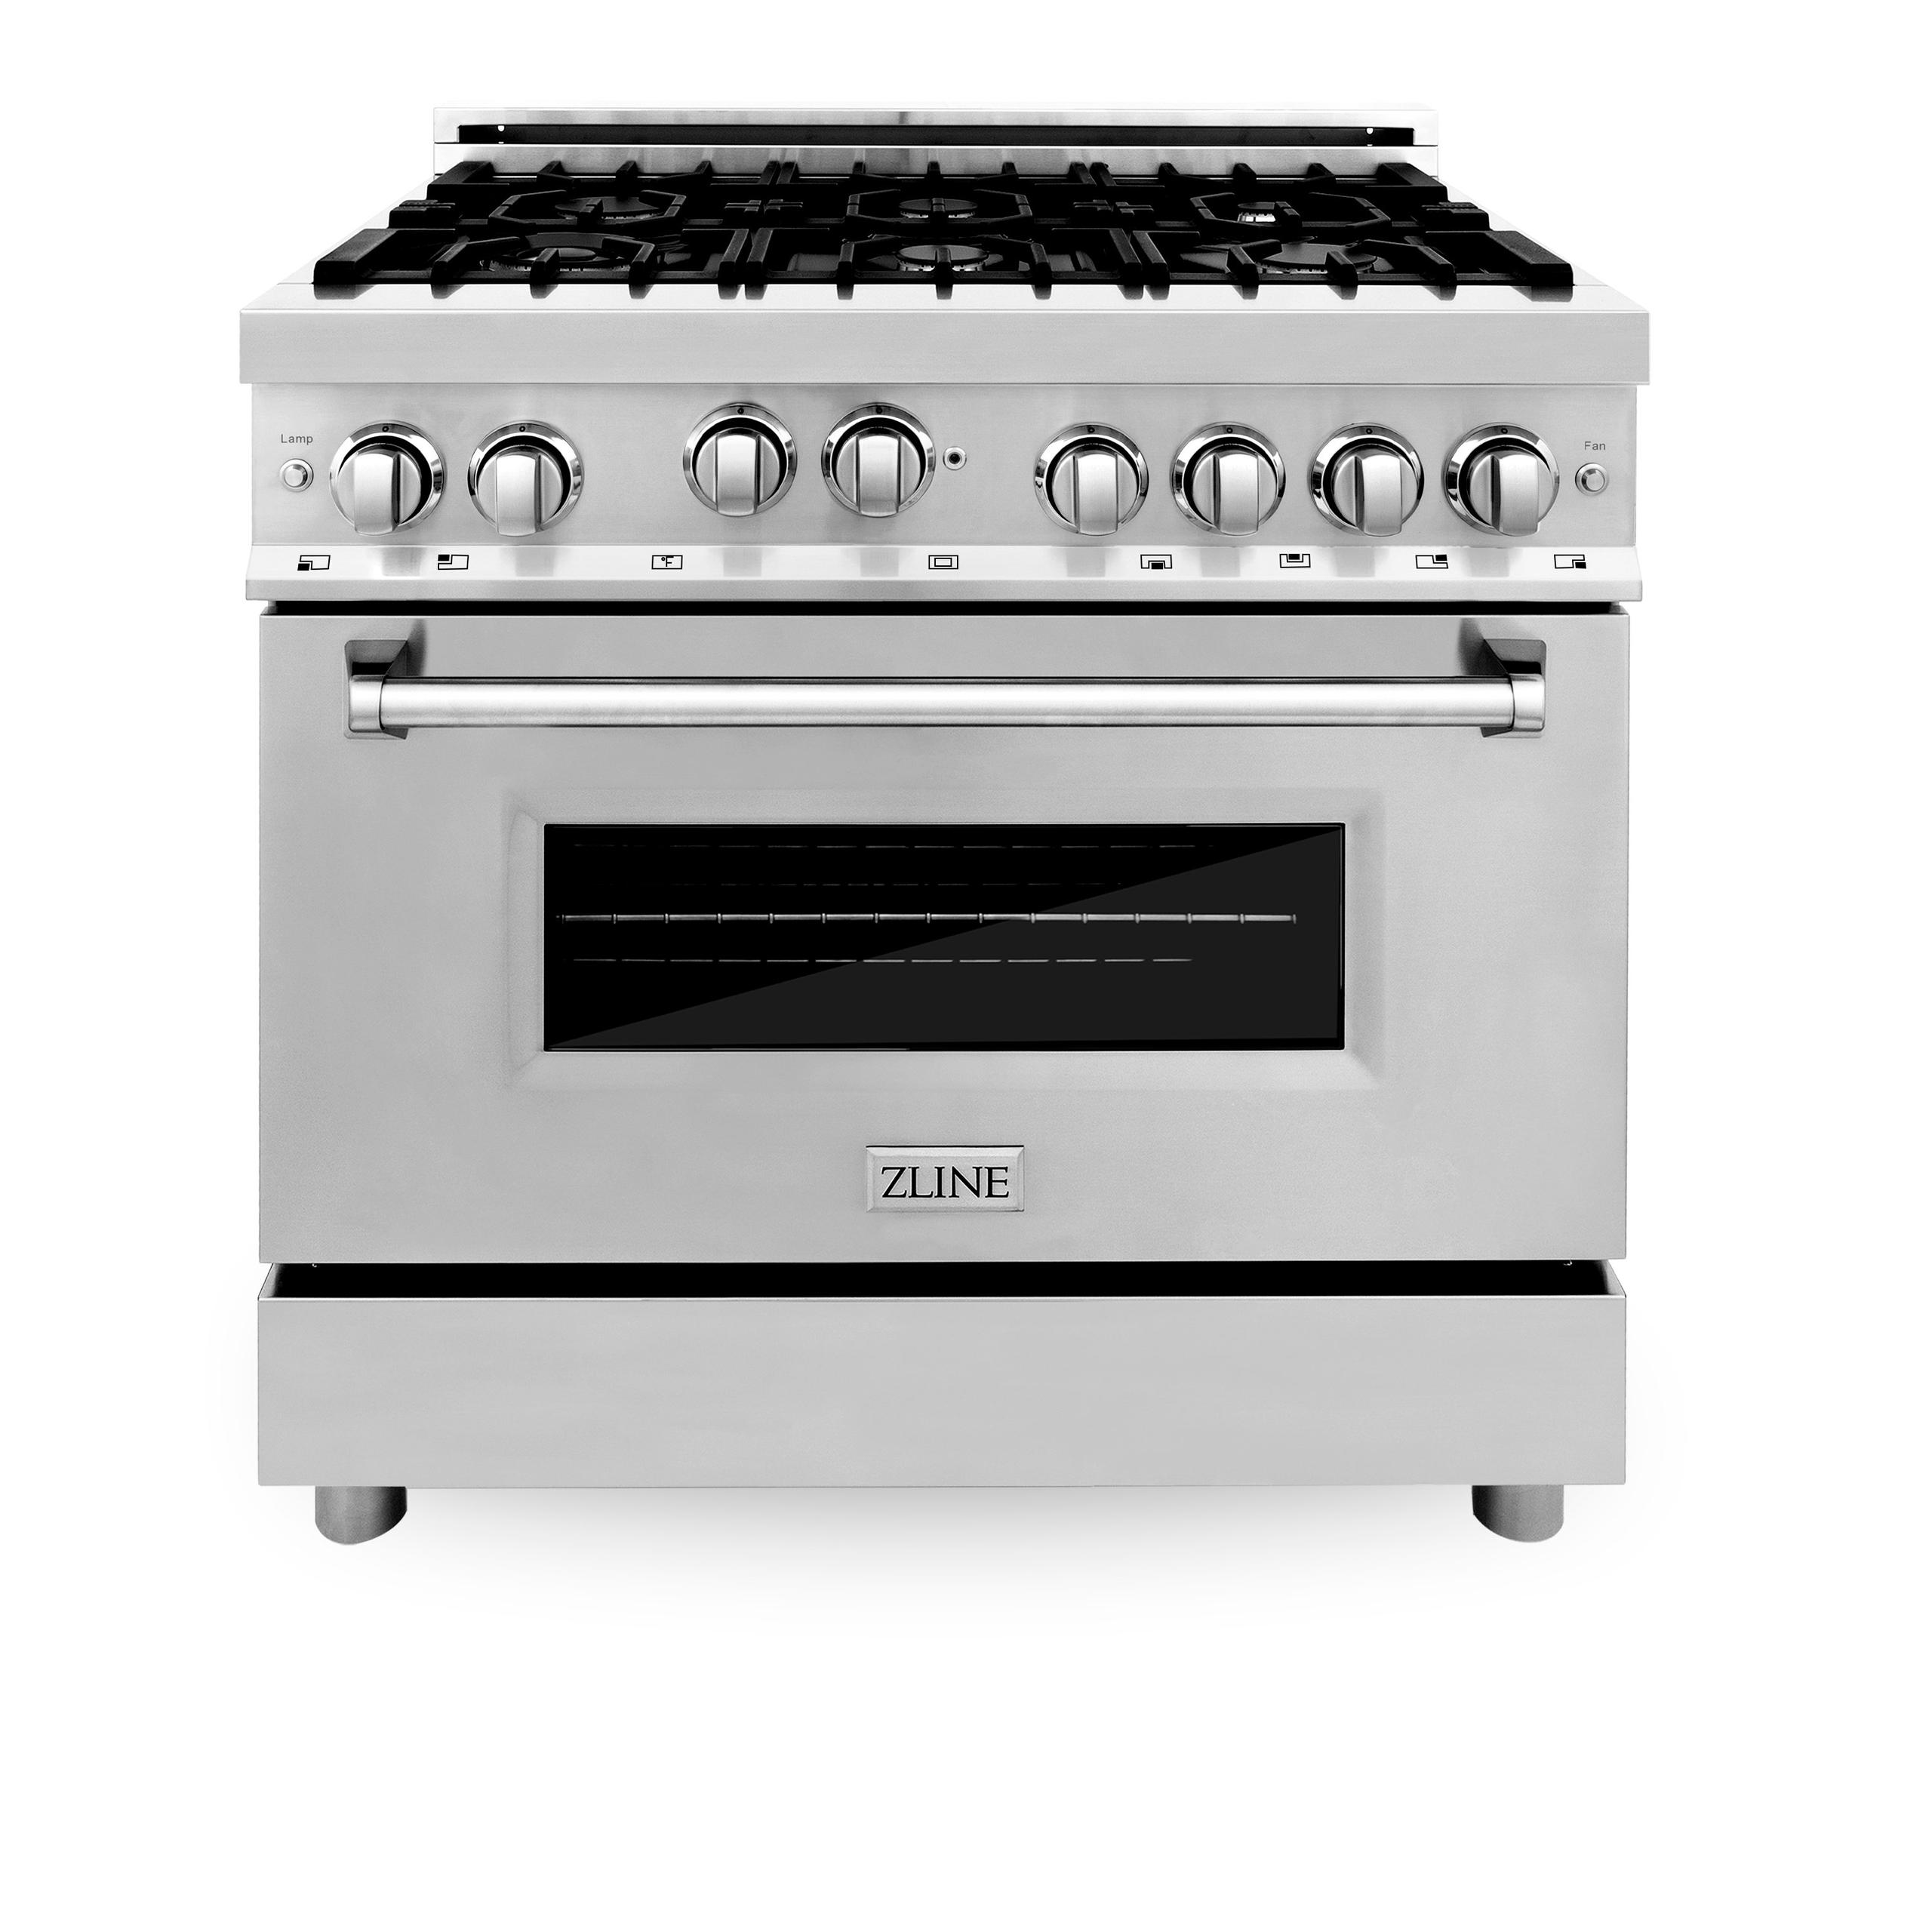 ZLINE KITCHEN AND BATH RG36 ZLINE 36" Professional 4.6 cu. ft. 6 Gas on Gas Range in Stainless Steel with Color Door Options Color: Stainless Steel